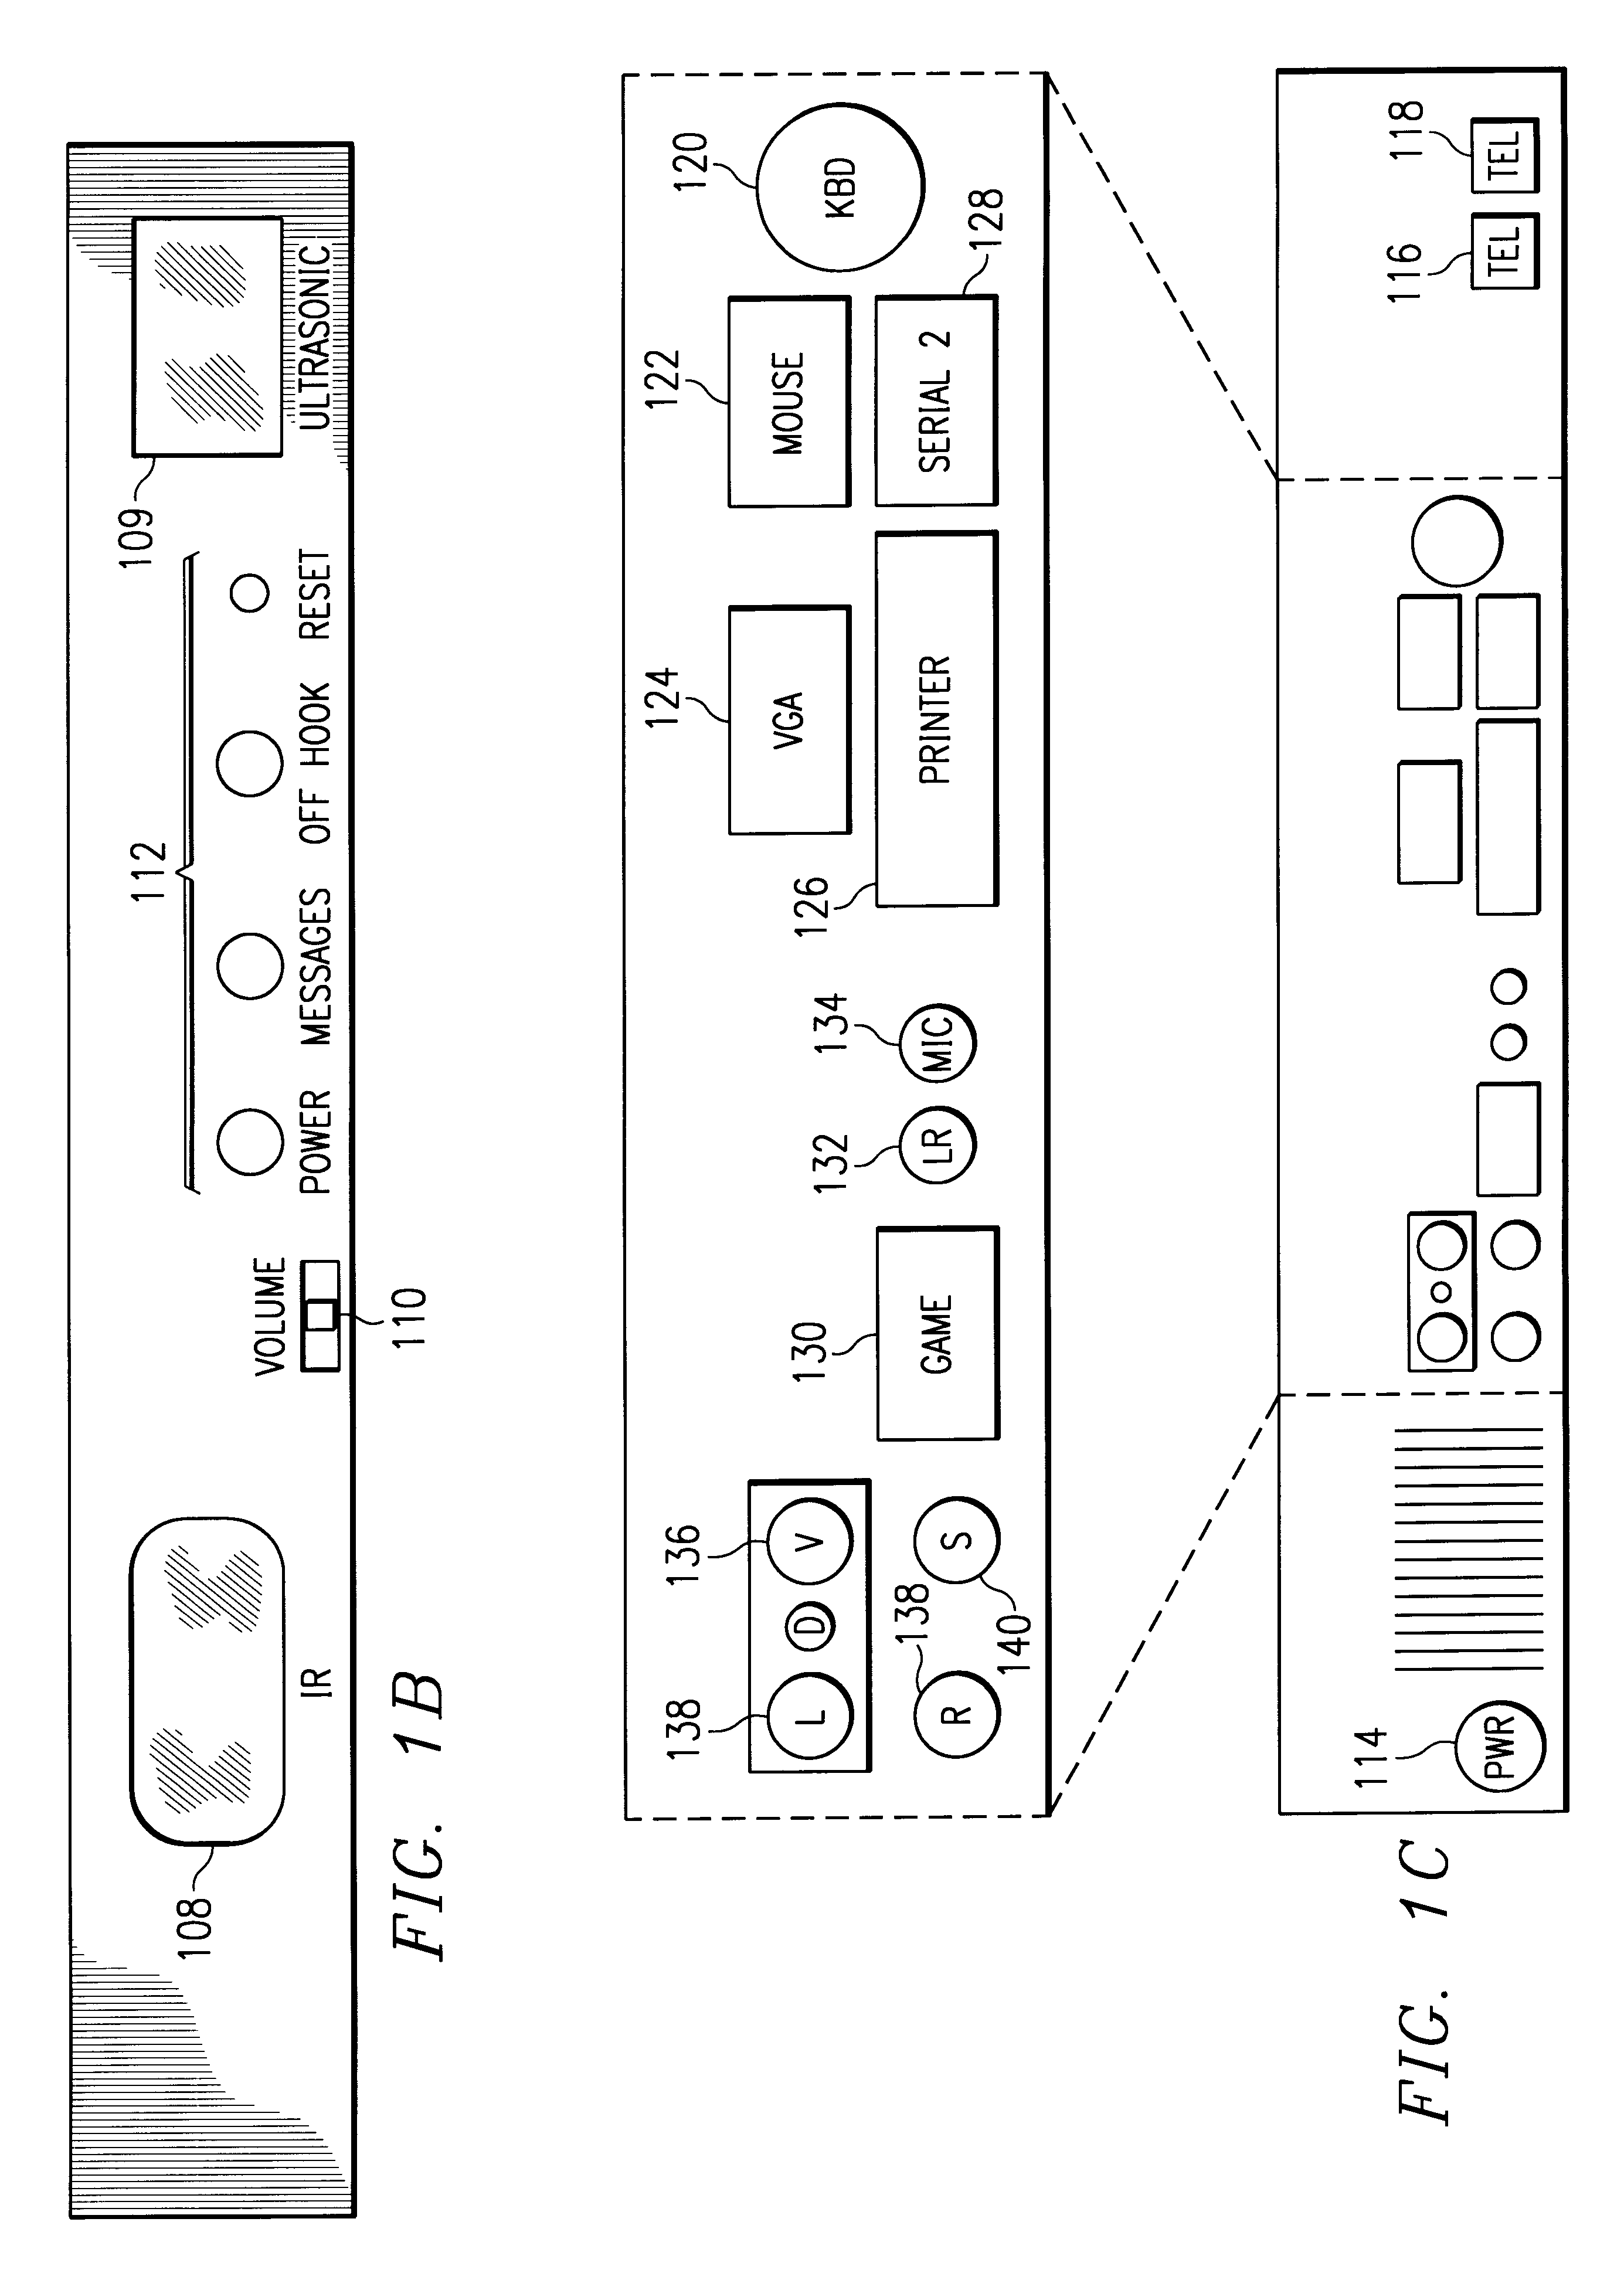 Method and system for simultaneous operation of multiple handheld IR control devices in a data processing system